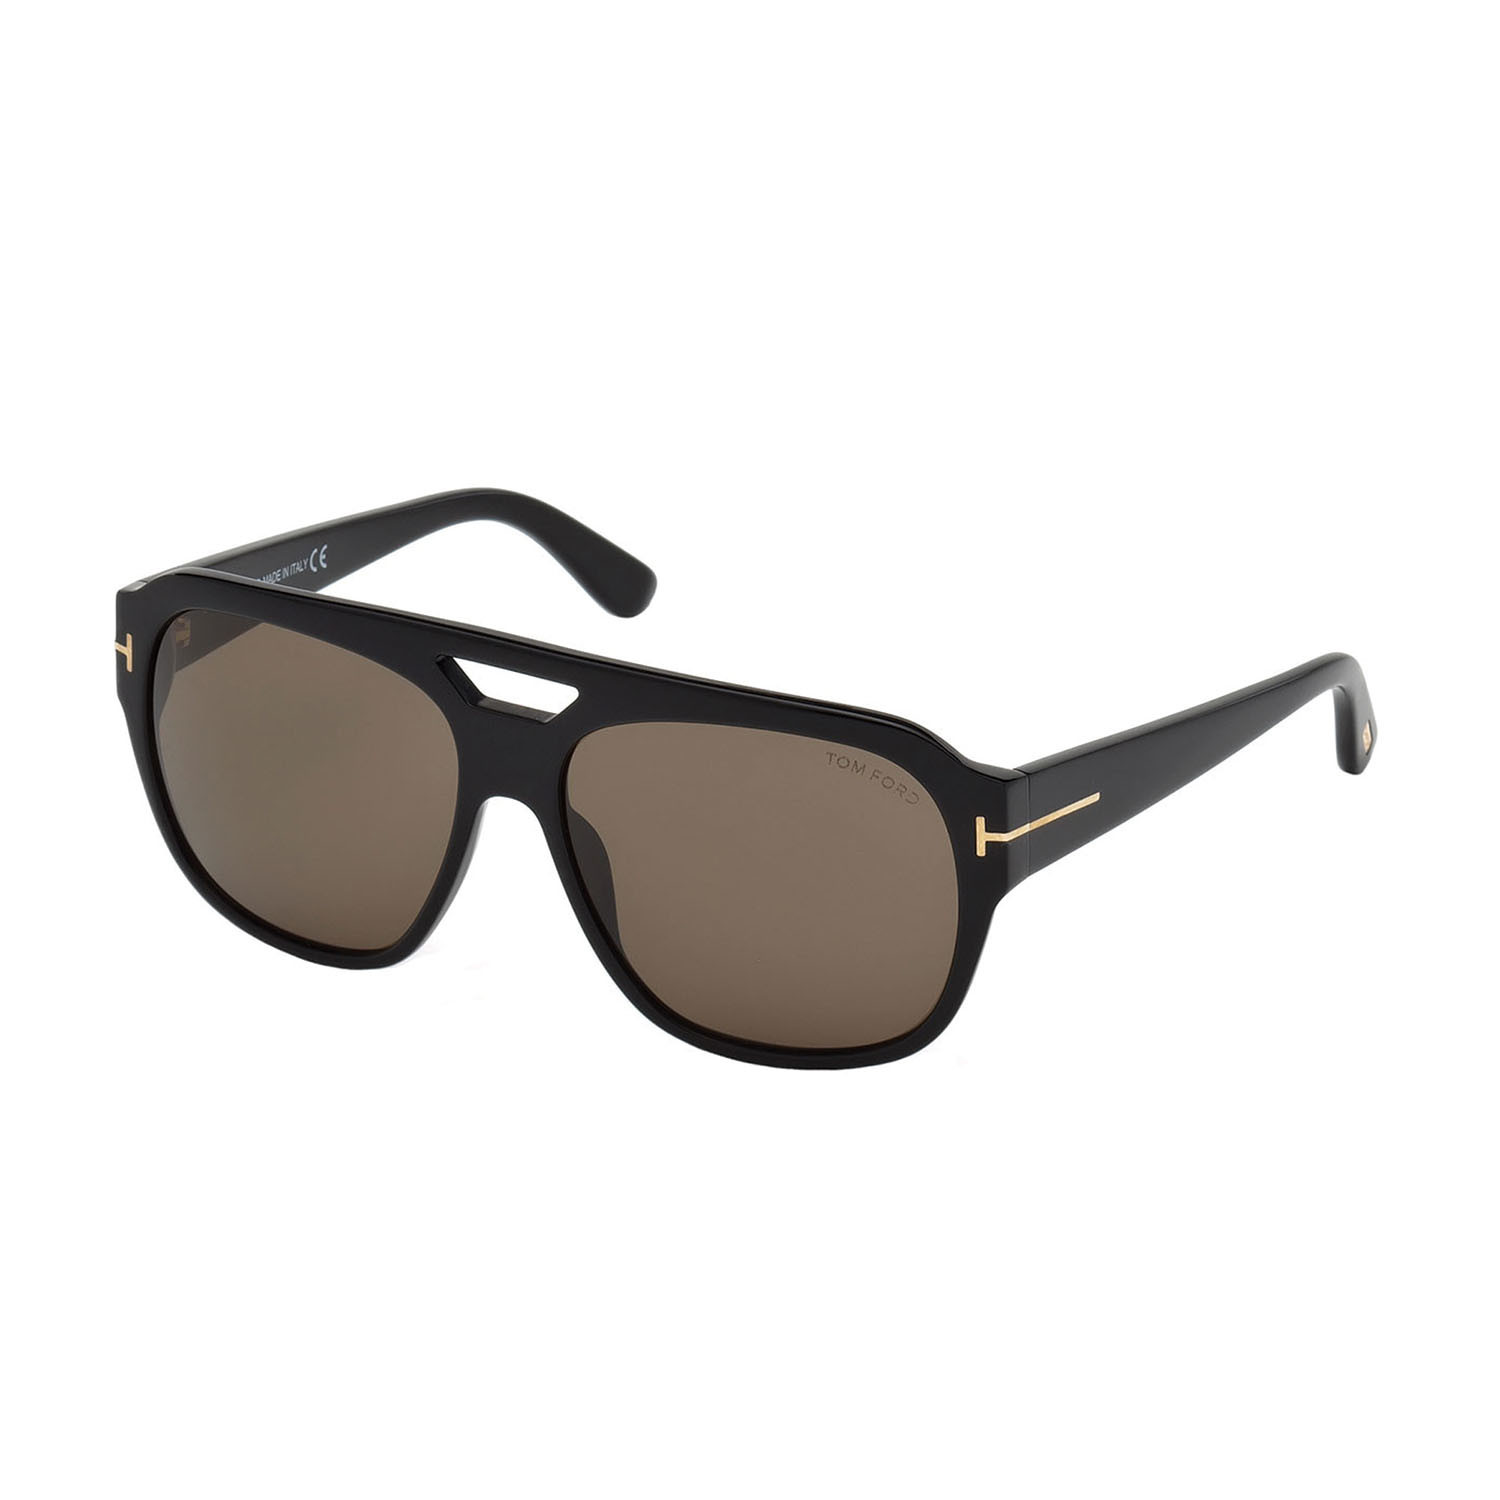 Men's Bachardy Sunglasses // Black + Brown - Tom Ford - Touch of Modern